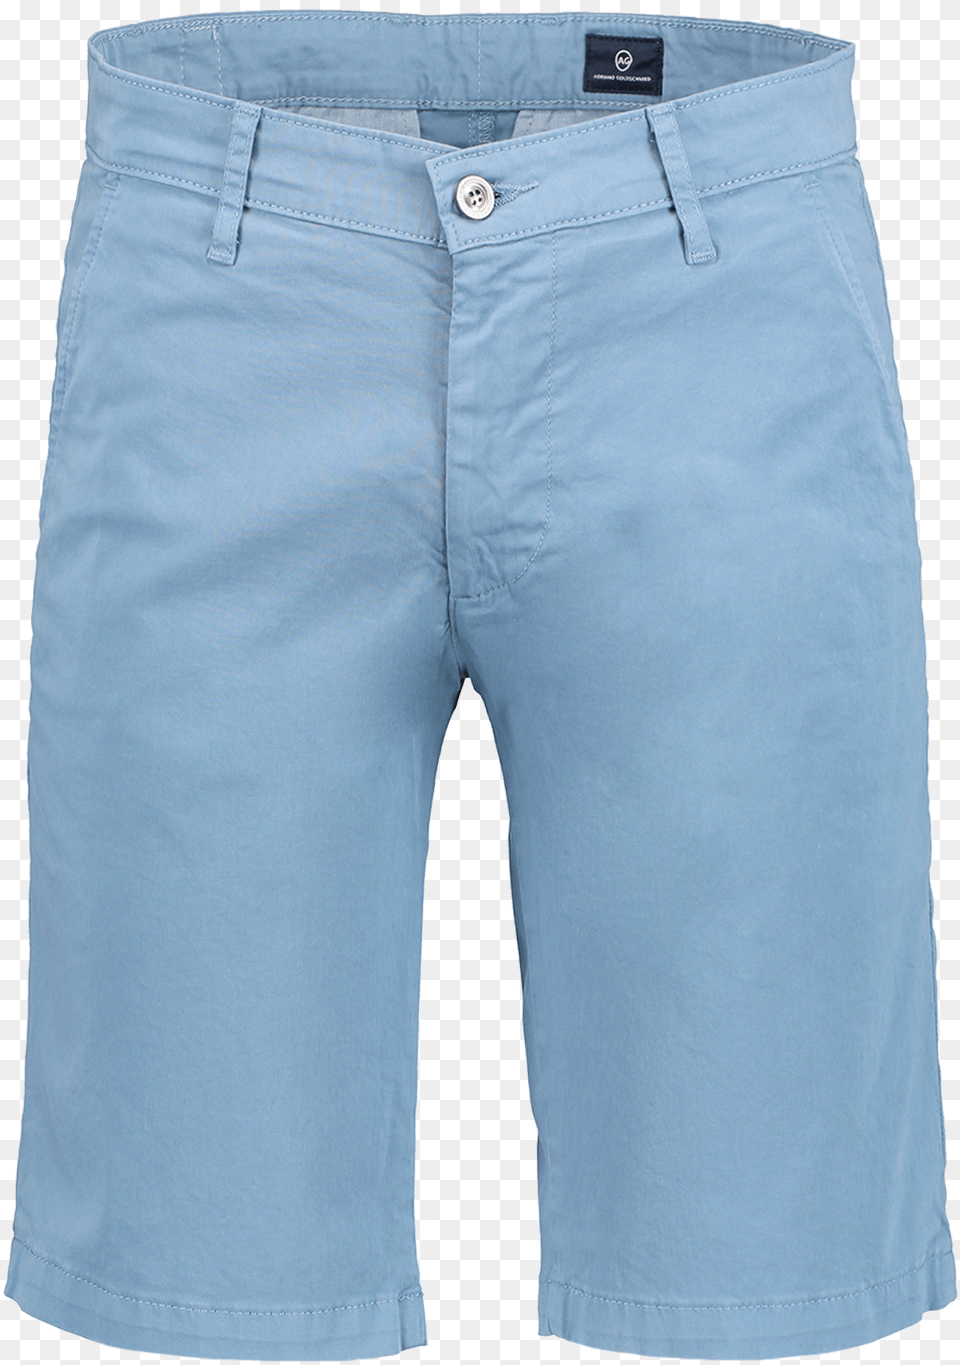 Griffin Short High Tide Bermuda Shorts, Clothing, Jeans, Pants Free Png